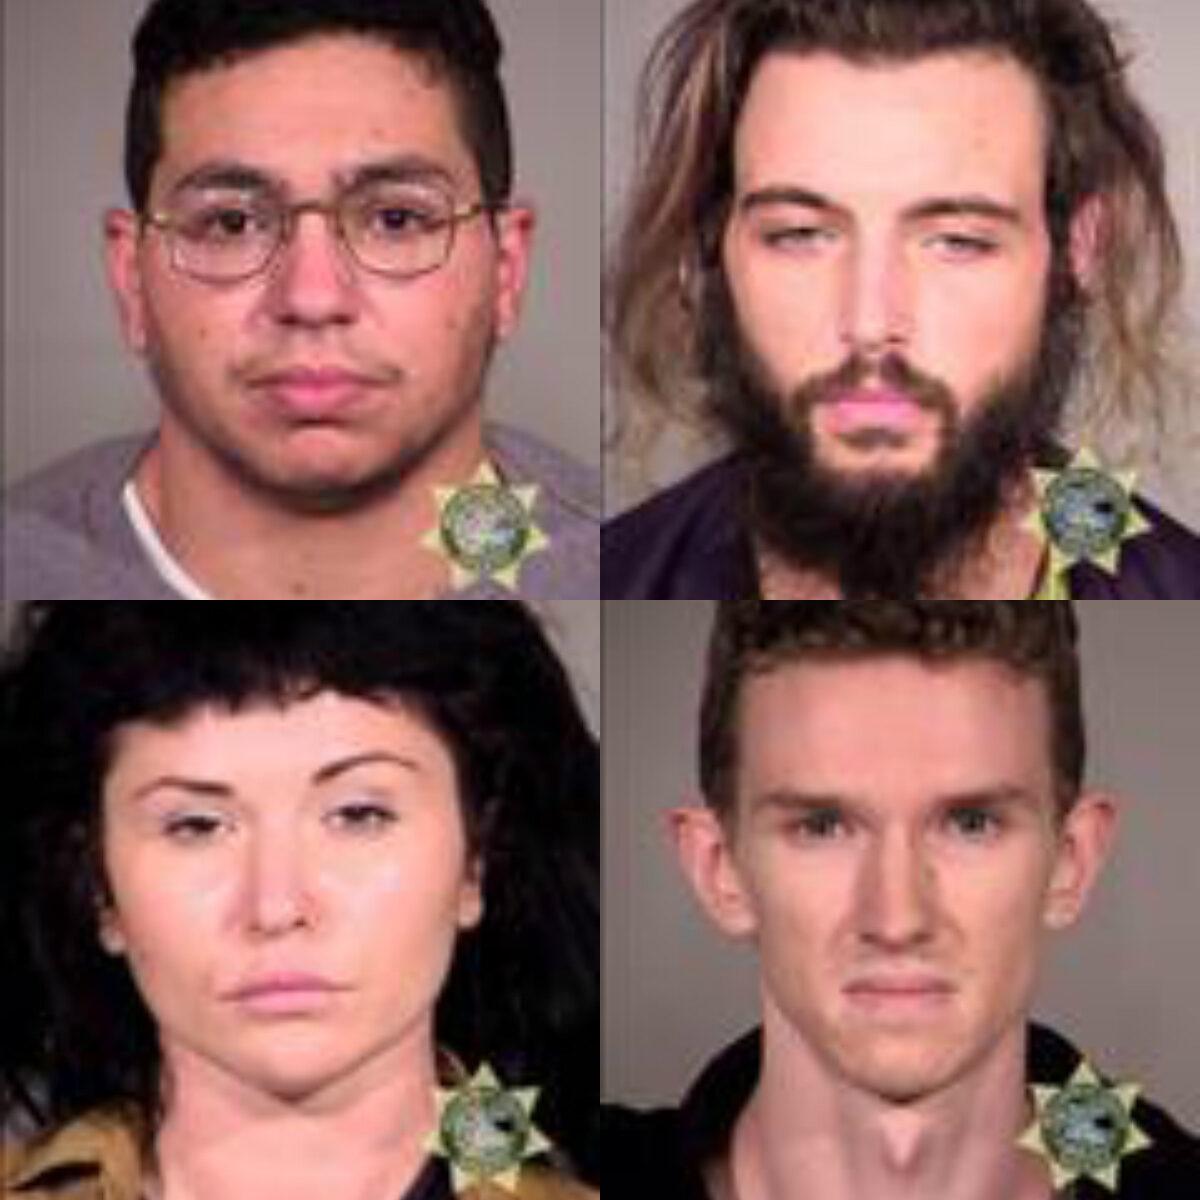 Laurielle Aviles (top L), Randal McCorkle (top R), Krystyna Solodenko (bottom L), and Brian Scherner (bottom R) were charged with participating in riots in Portland, Ore., on various dates this year. (Multnomah County Sheriff's Office)